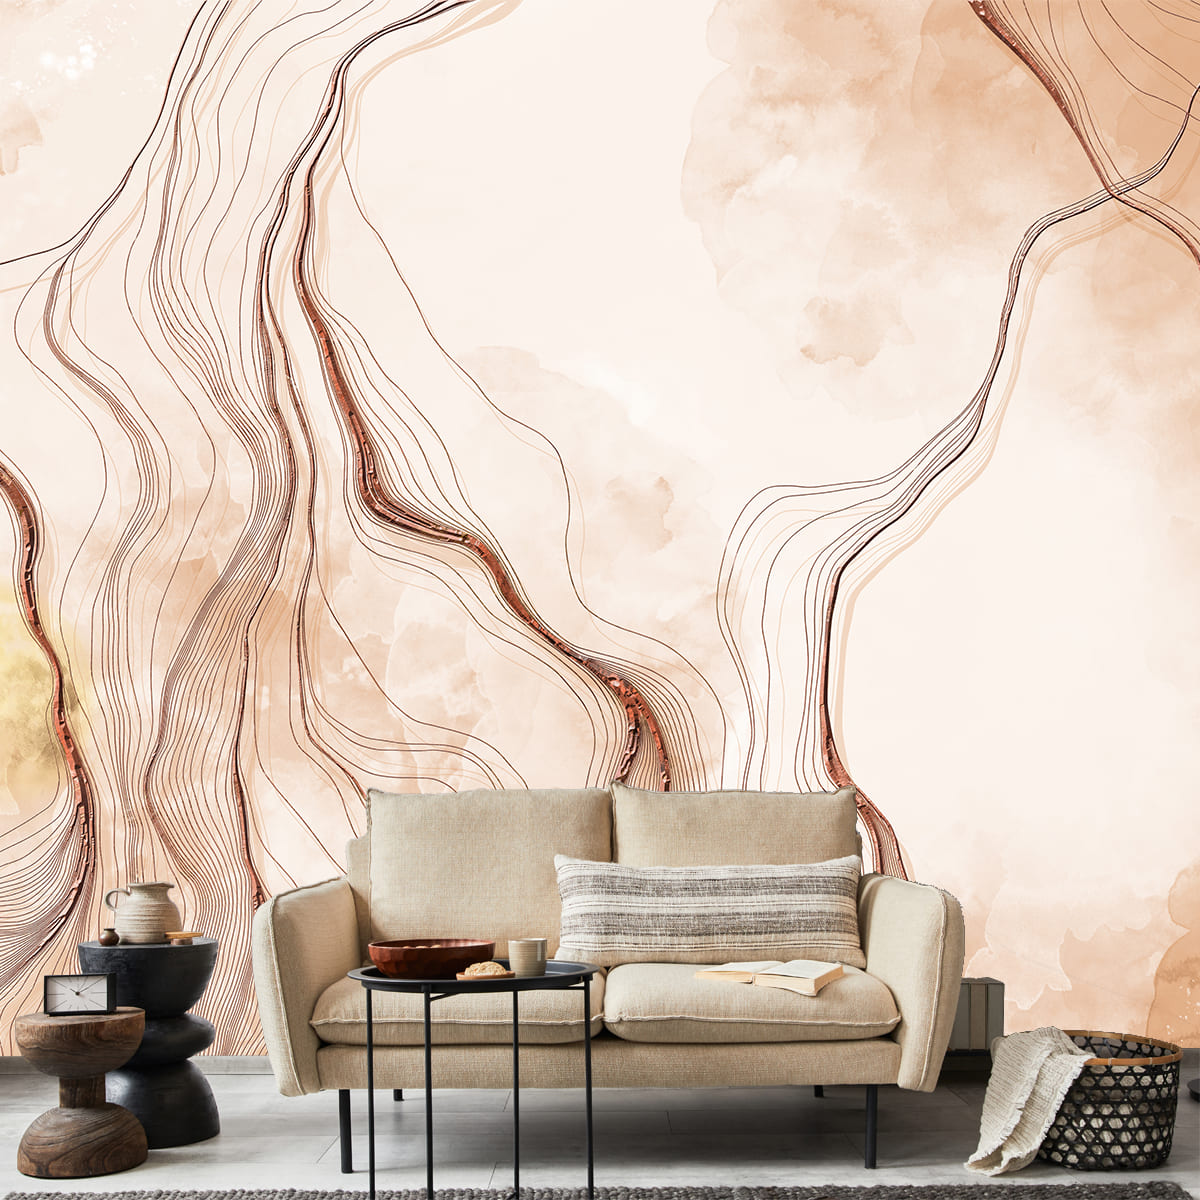 Designer Peel and Stick Wallpaper For Your Home | Tempaper & Co.